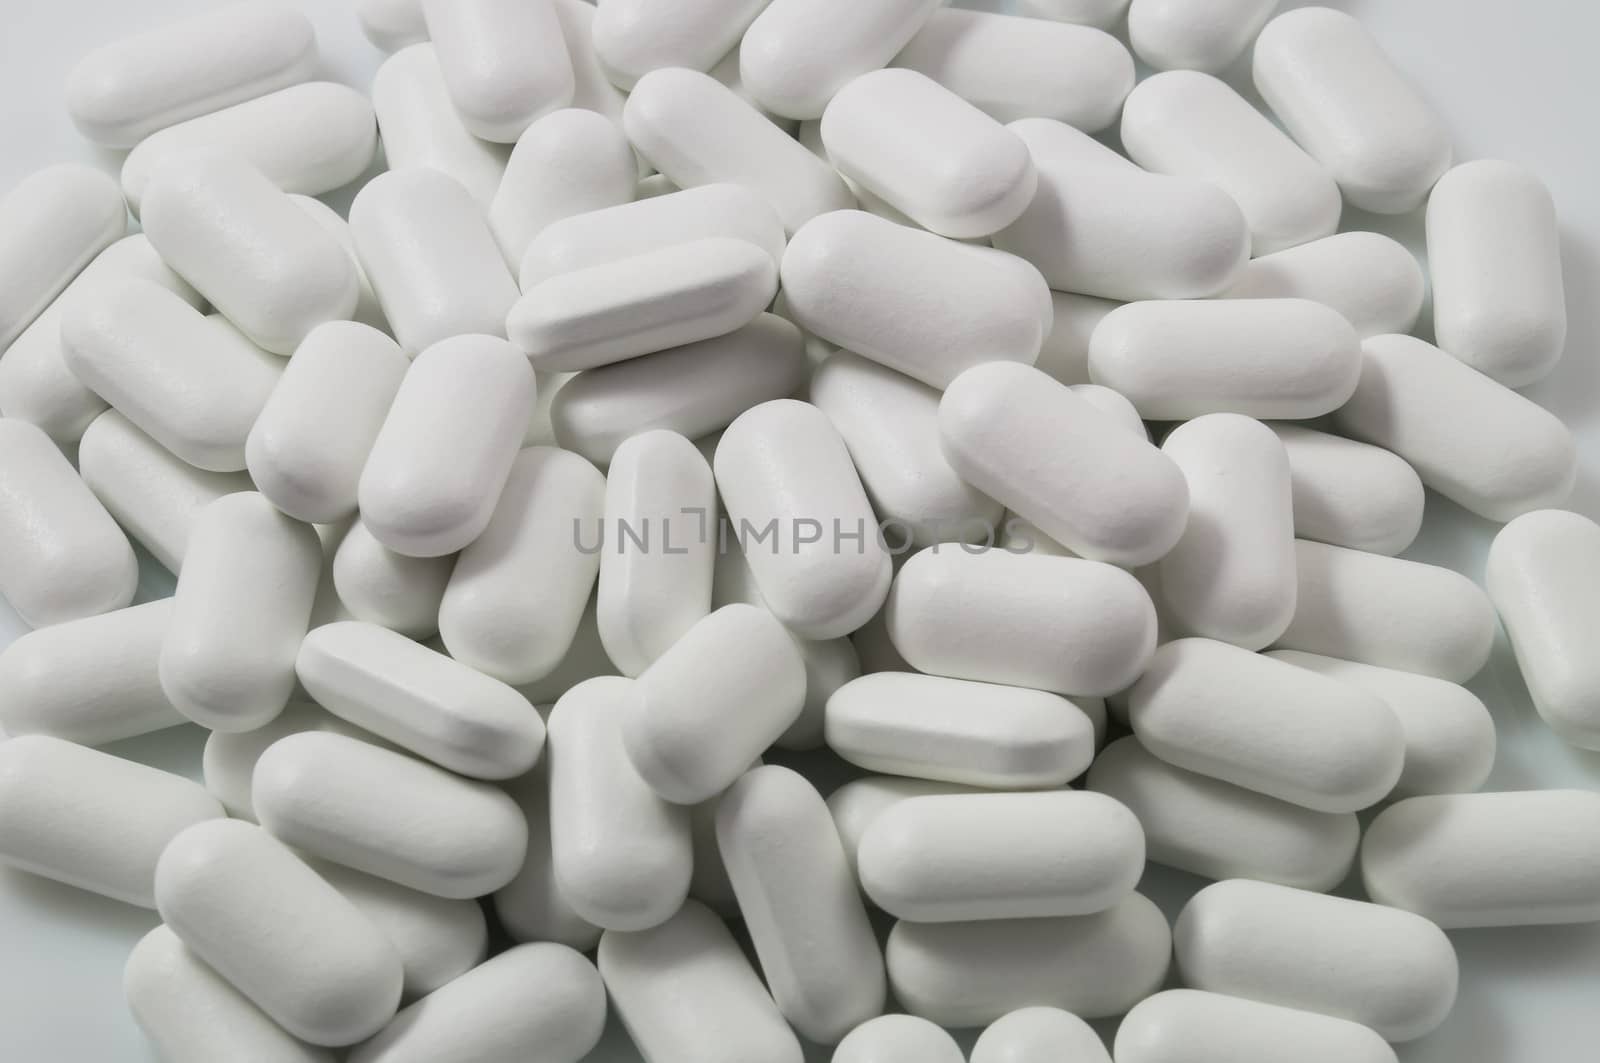 White pills scattered on a white background.